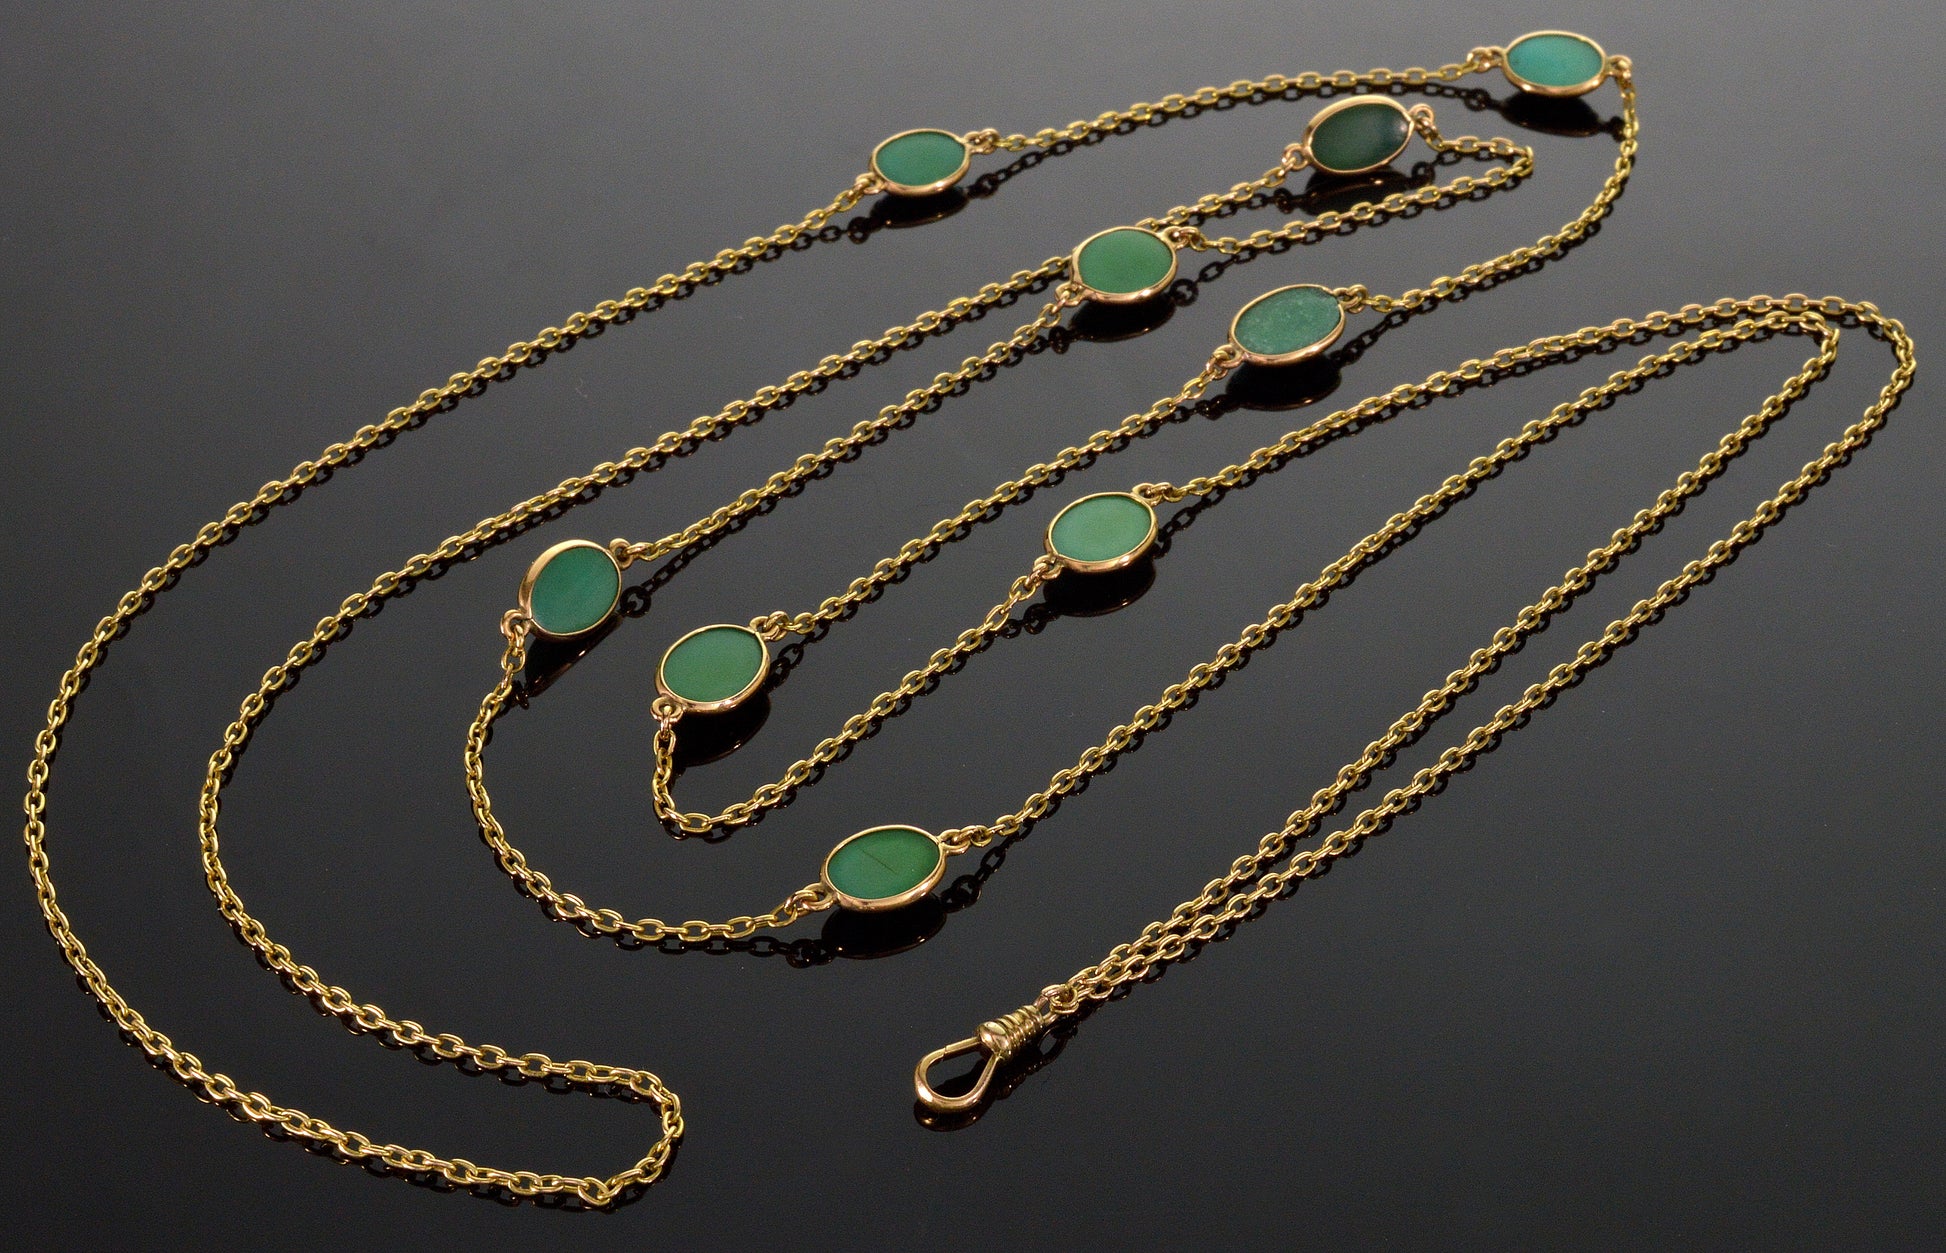 Antique Victorian 14K Gold Turquoise Guard Chain Necklace C.1890